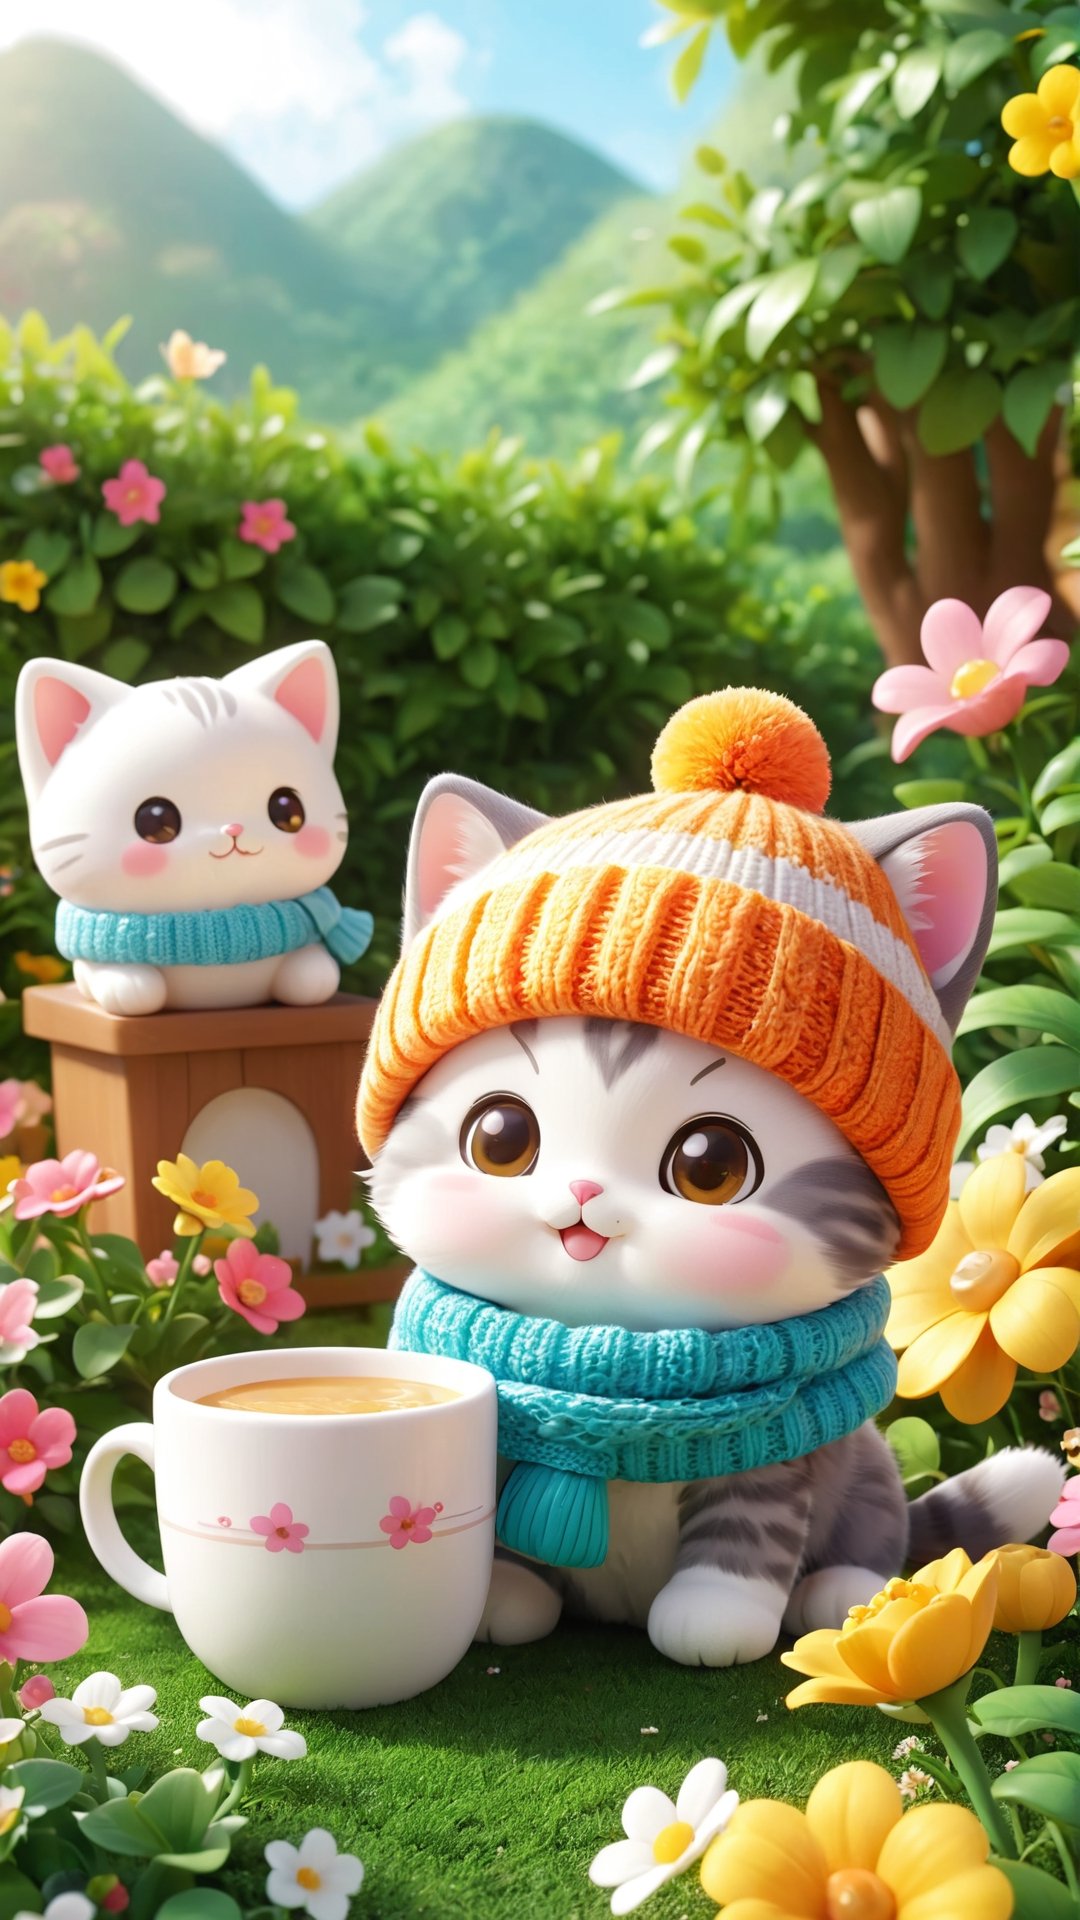 "Chibi" mascots include a cute Kitten with a cup, wearing a knitted hat and scarf, hyper realistic soft toy on a flower garden background, very cute, happy and beautiful, cute detailed illustration expressing joy, fully dressed, tiny, cute scene, stunning, tiny detail, fluffy, beautiful art, 3d render, cinematic
负向提示